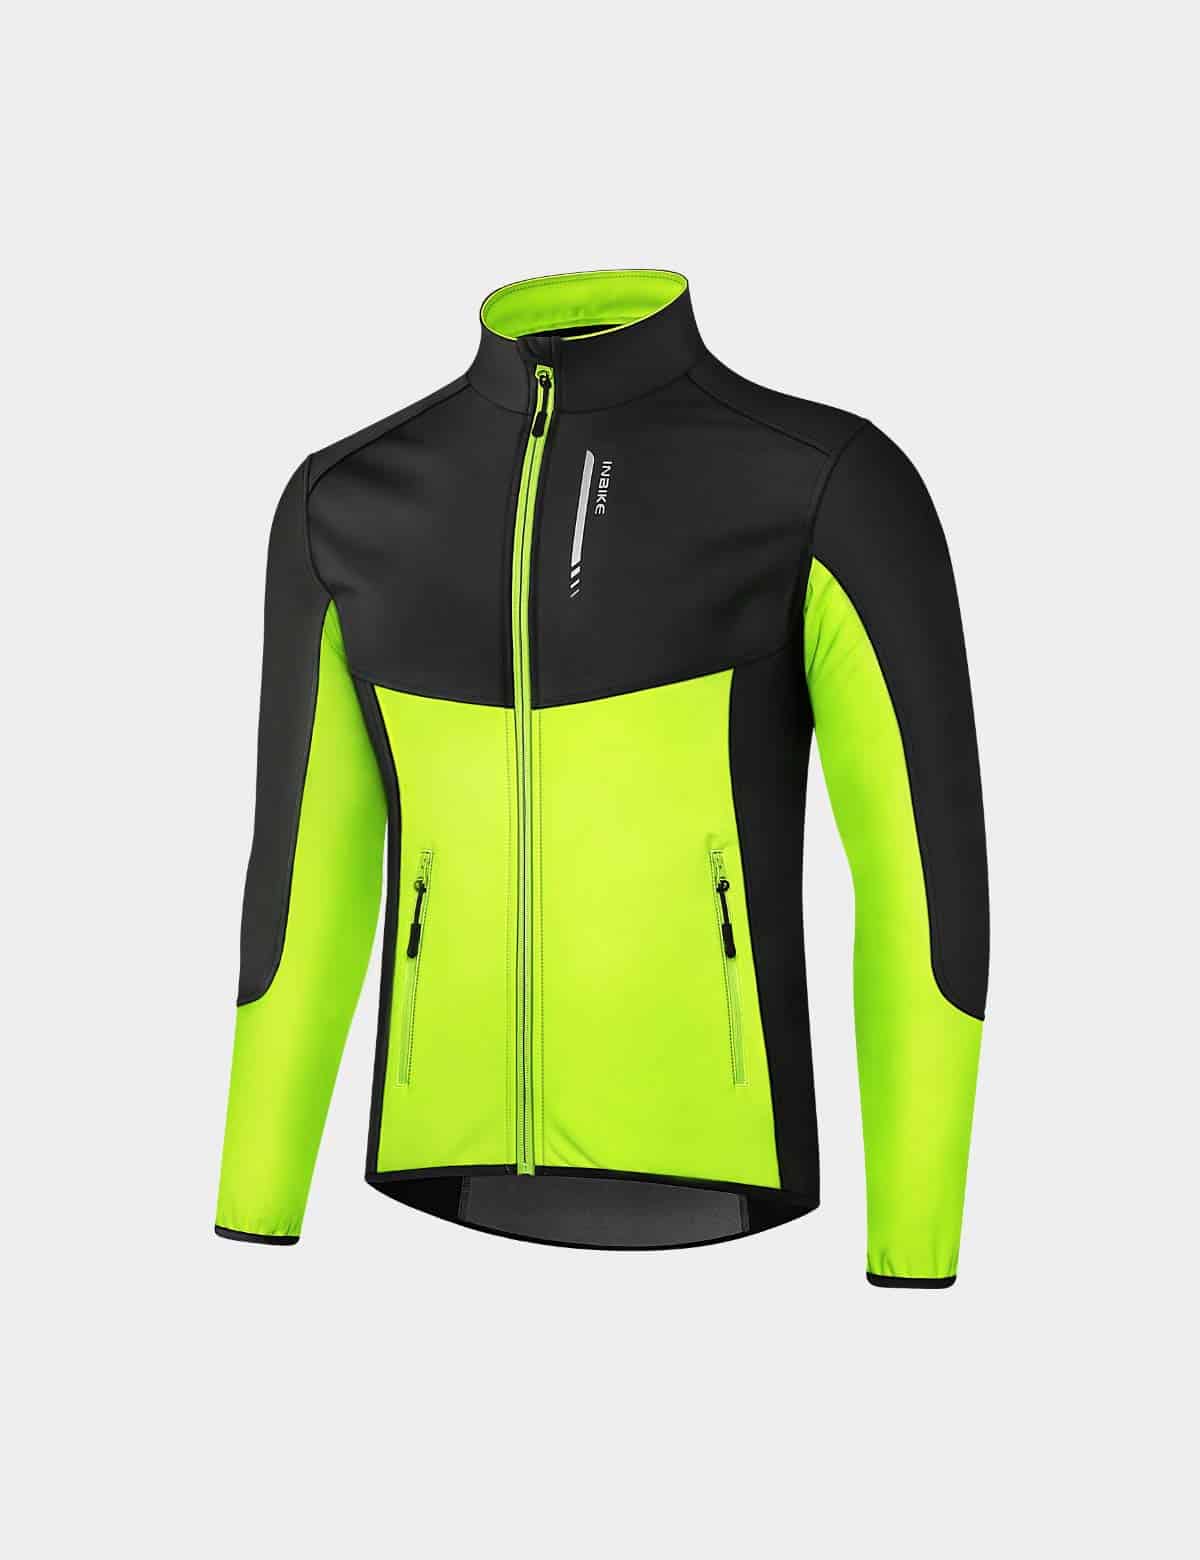 How to choose the perfect winter cycling jacket | road.cc